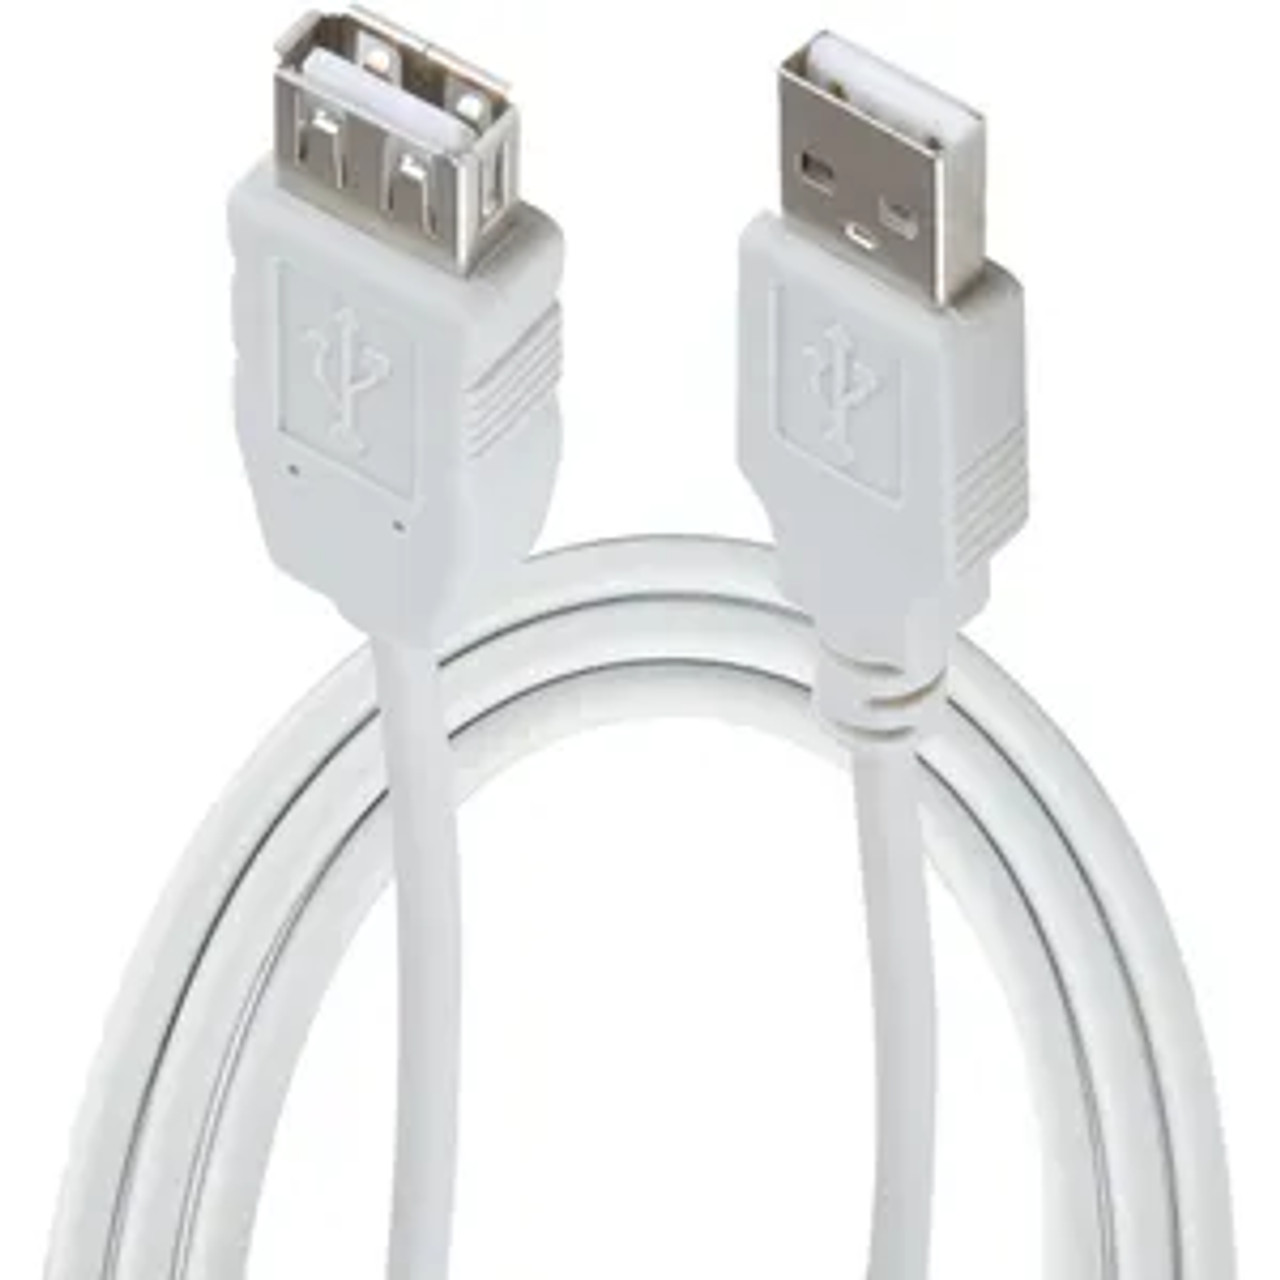 Logilink USB 2.0 Cable USB-A/M to USB-A/F Gray 3m CU0011